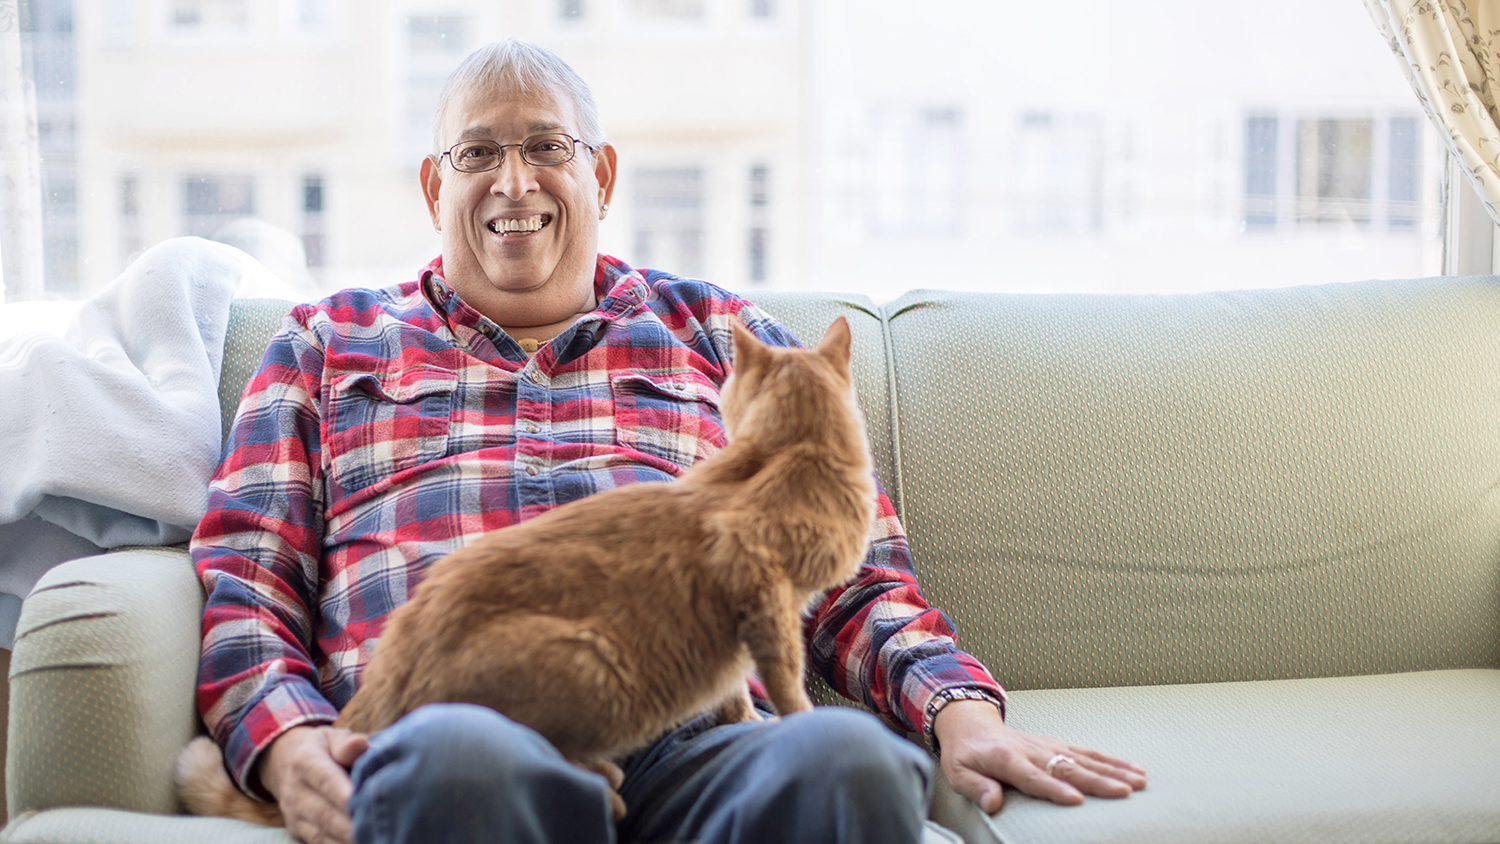 Reynaldo Garza sits on a couch with his cat